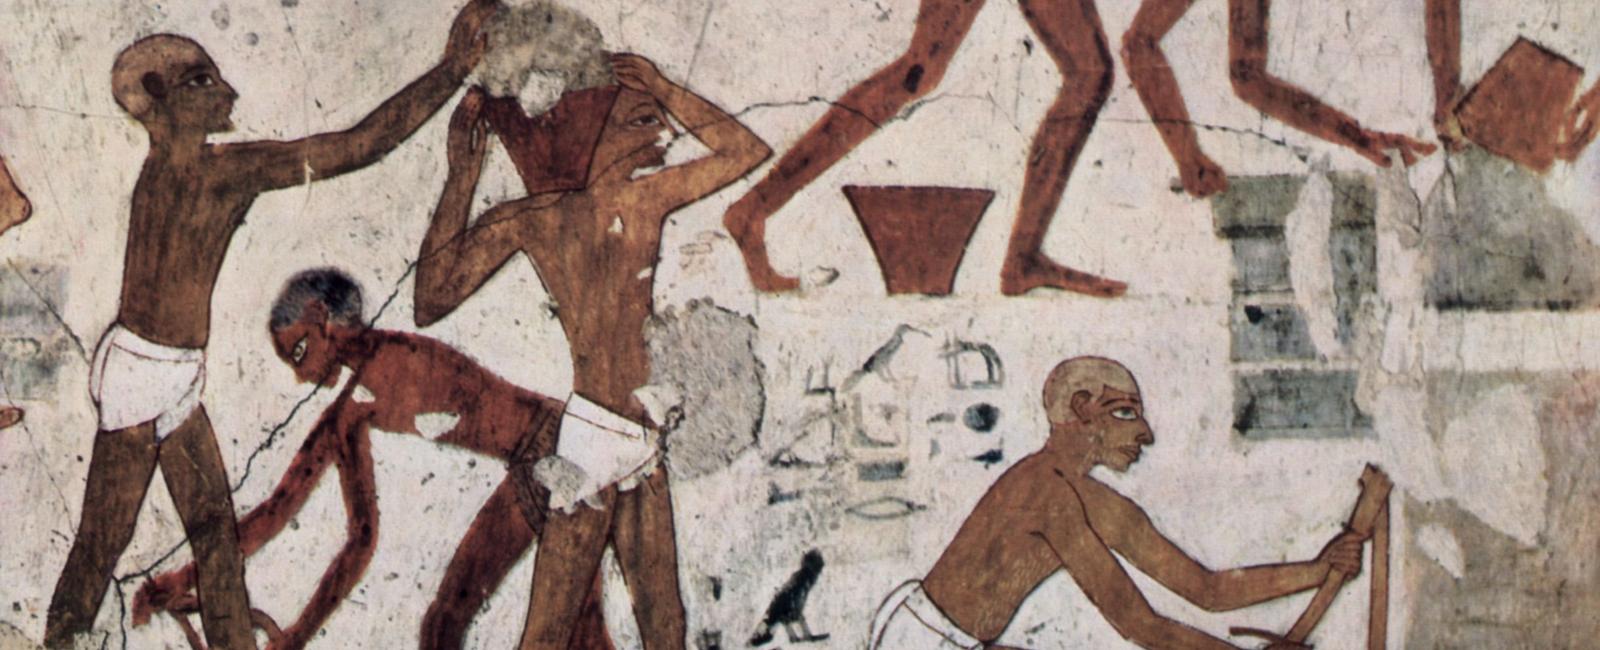 Paid workers built up the pyramids of egypt instead of slaves or prisoners